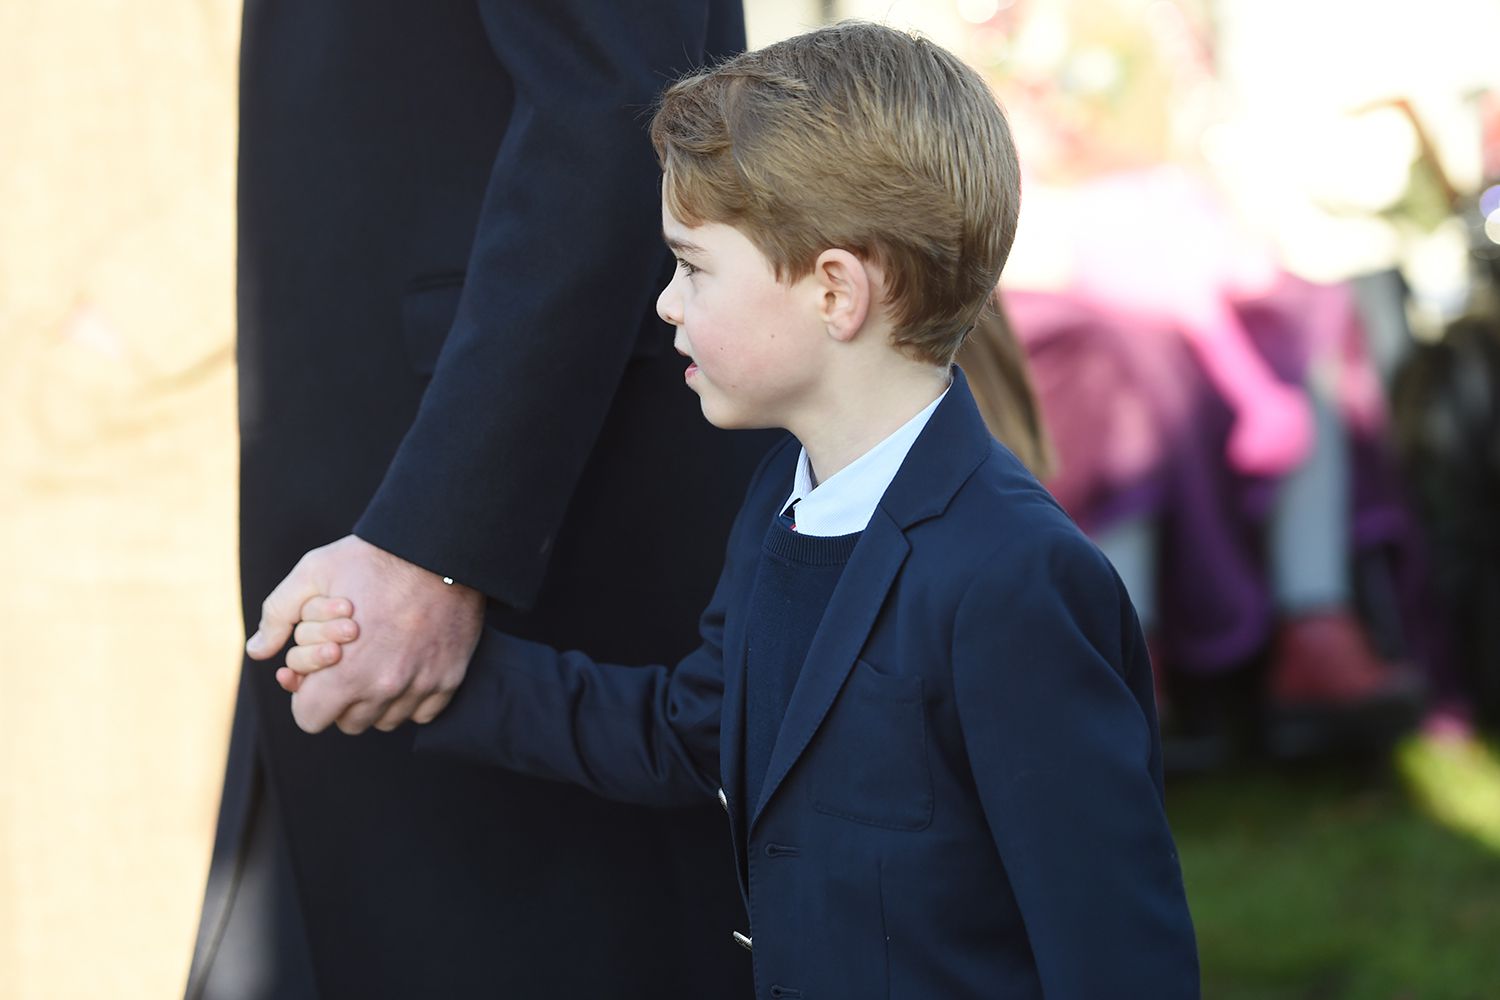 Prince George arriving to attend the Christmas Day morning church service at St Mary Magdalene Church in Sandringham, Norfolk. (Photo by Joe Giddens/PA Images via Getty Images)